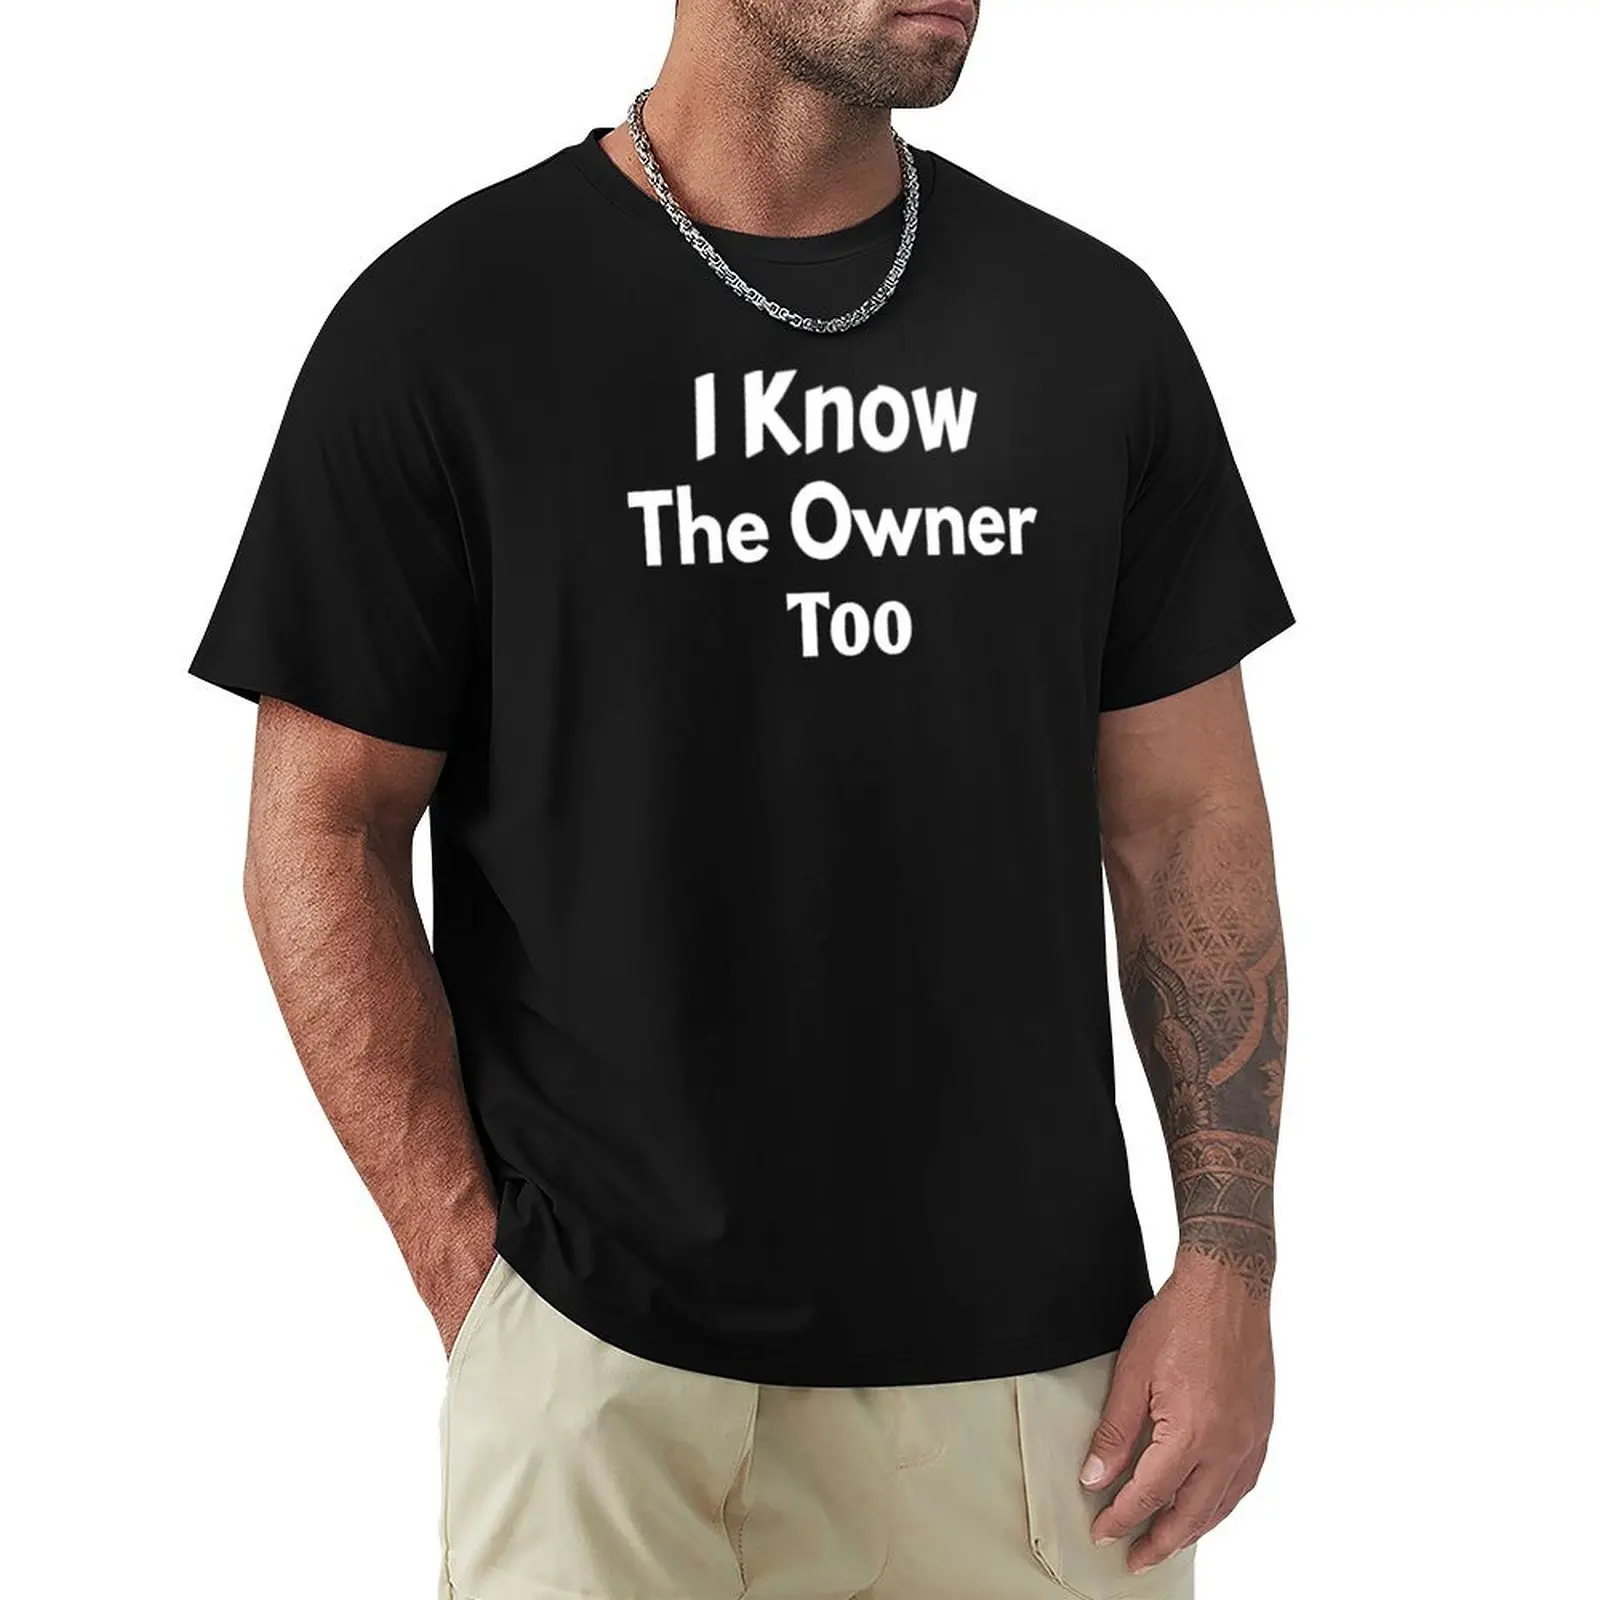 

I Know The Owner Too/ Funny Bartender / Bartender Gift / T-Shirt quick-drying animal prinfor boys mens tall t shirts